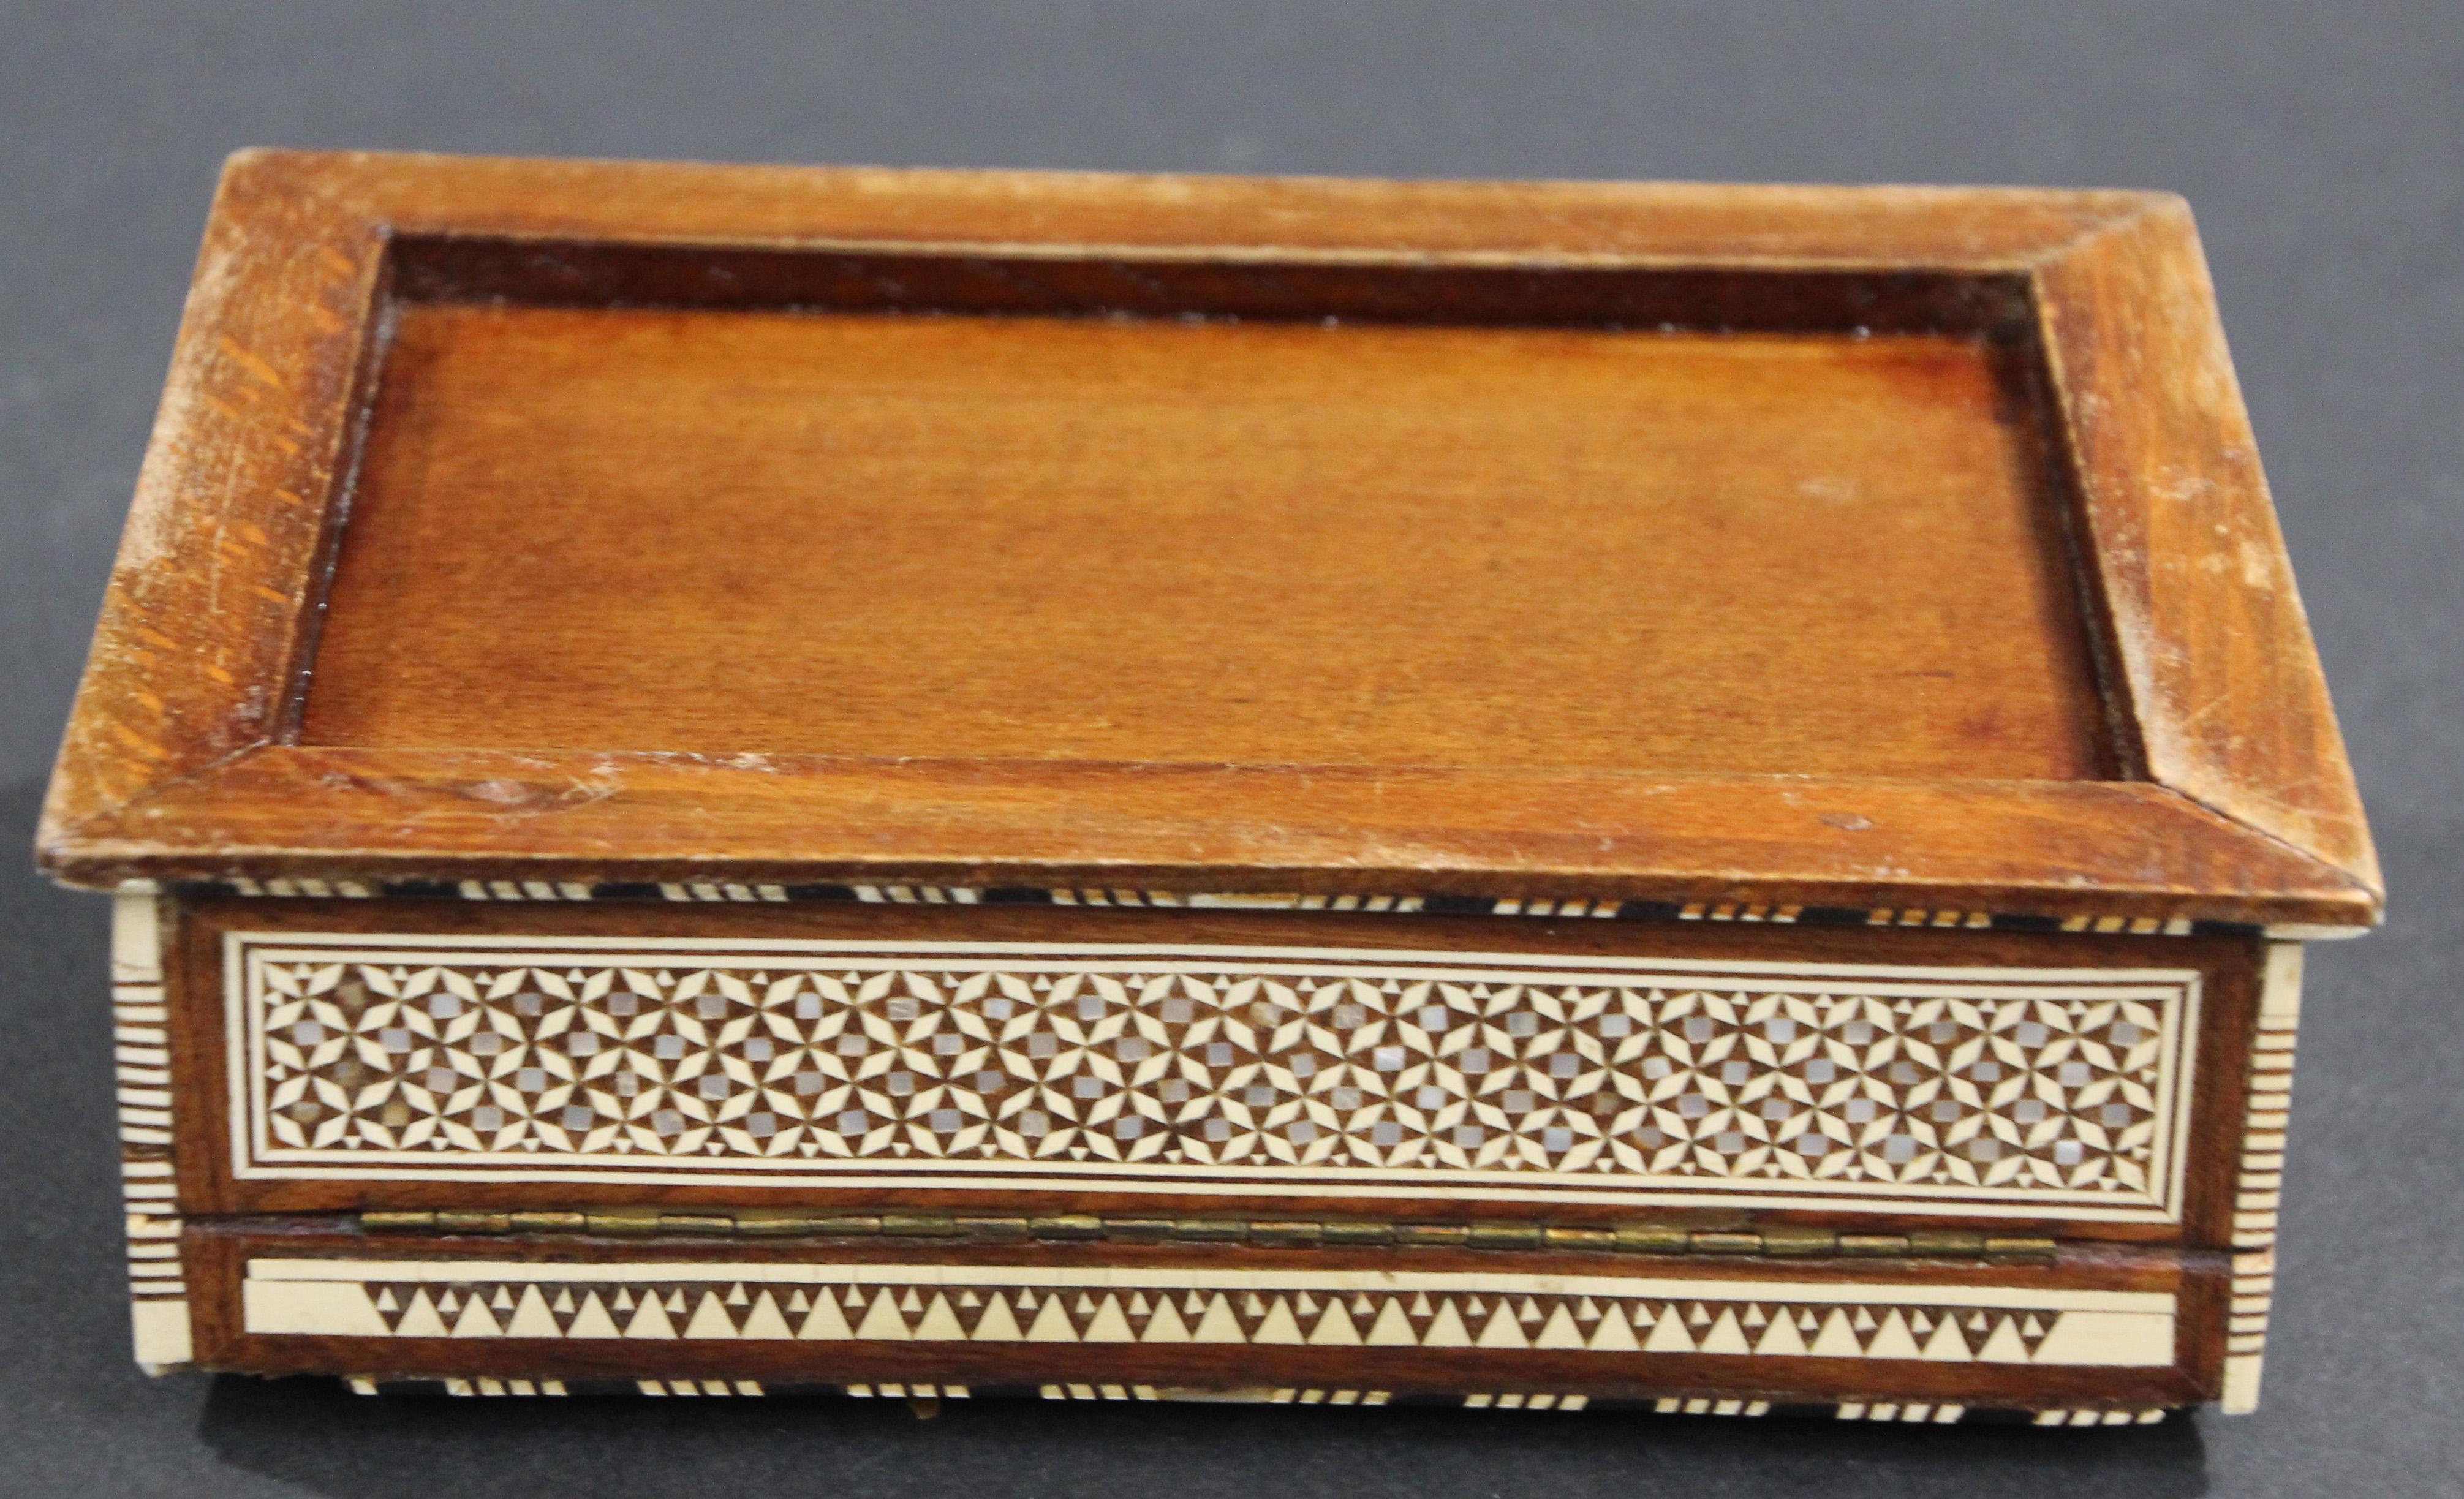 Moorish Handcrafted Middle Eastern Mosaic Inlaid Decorative Box For Sale 4